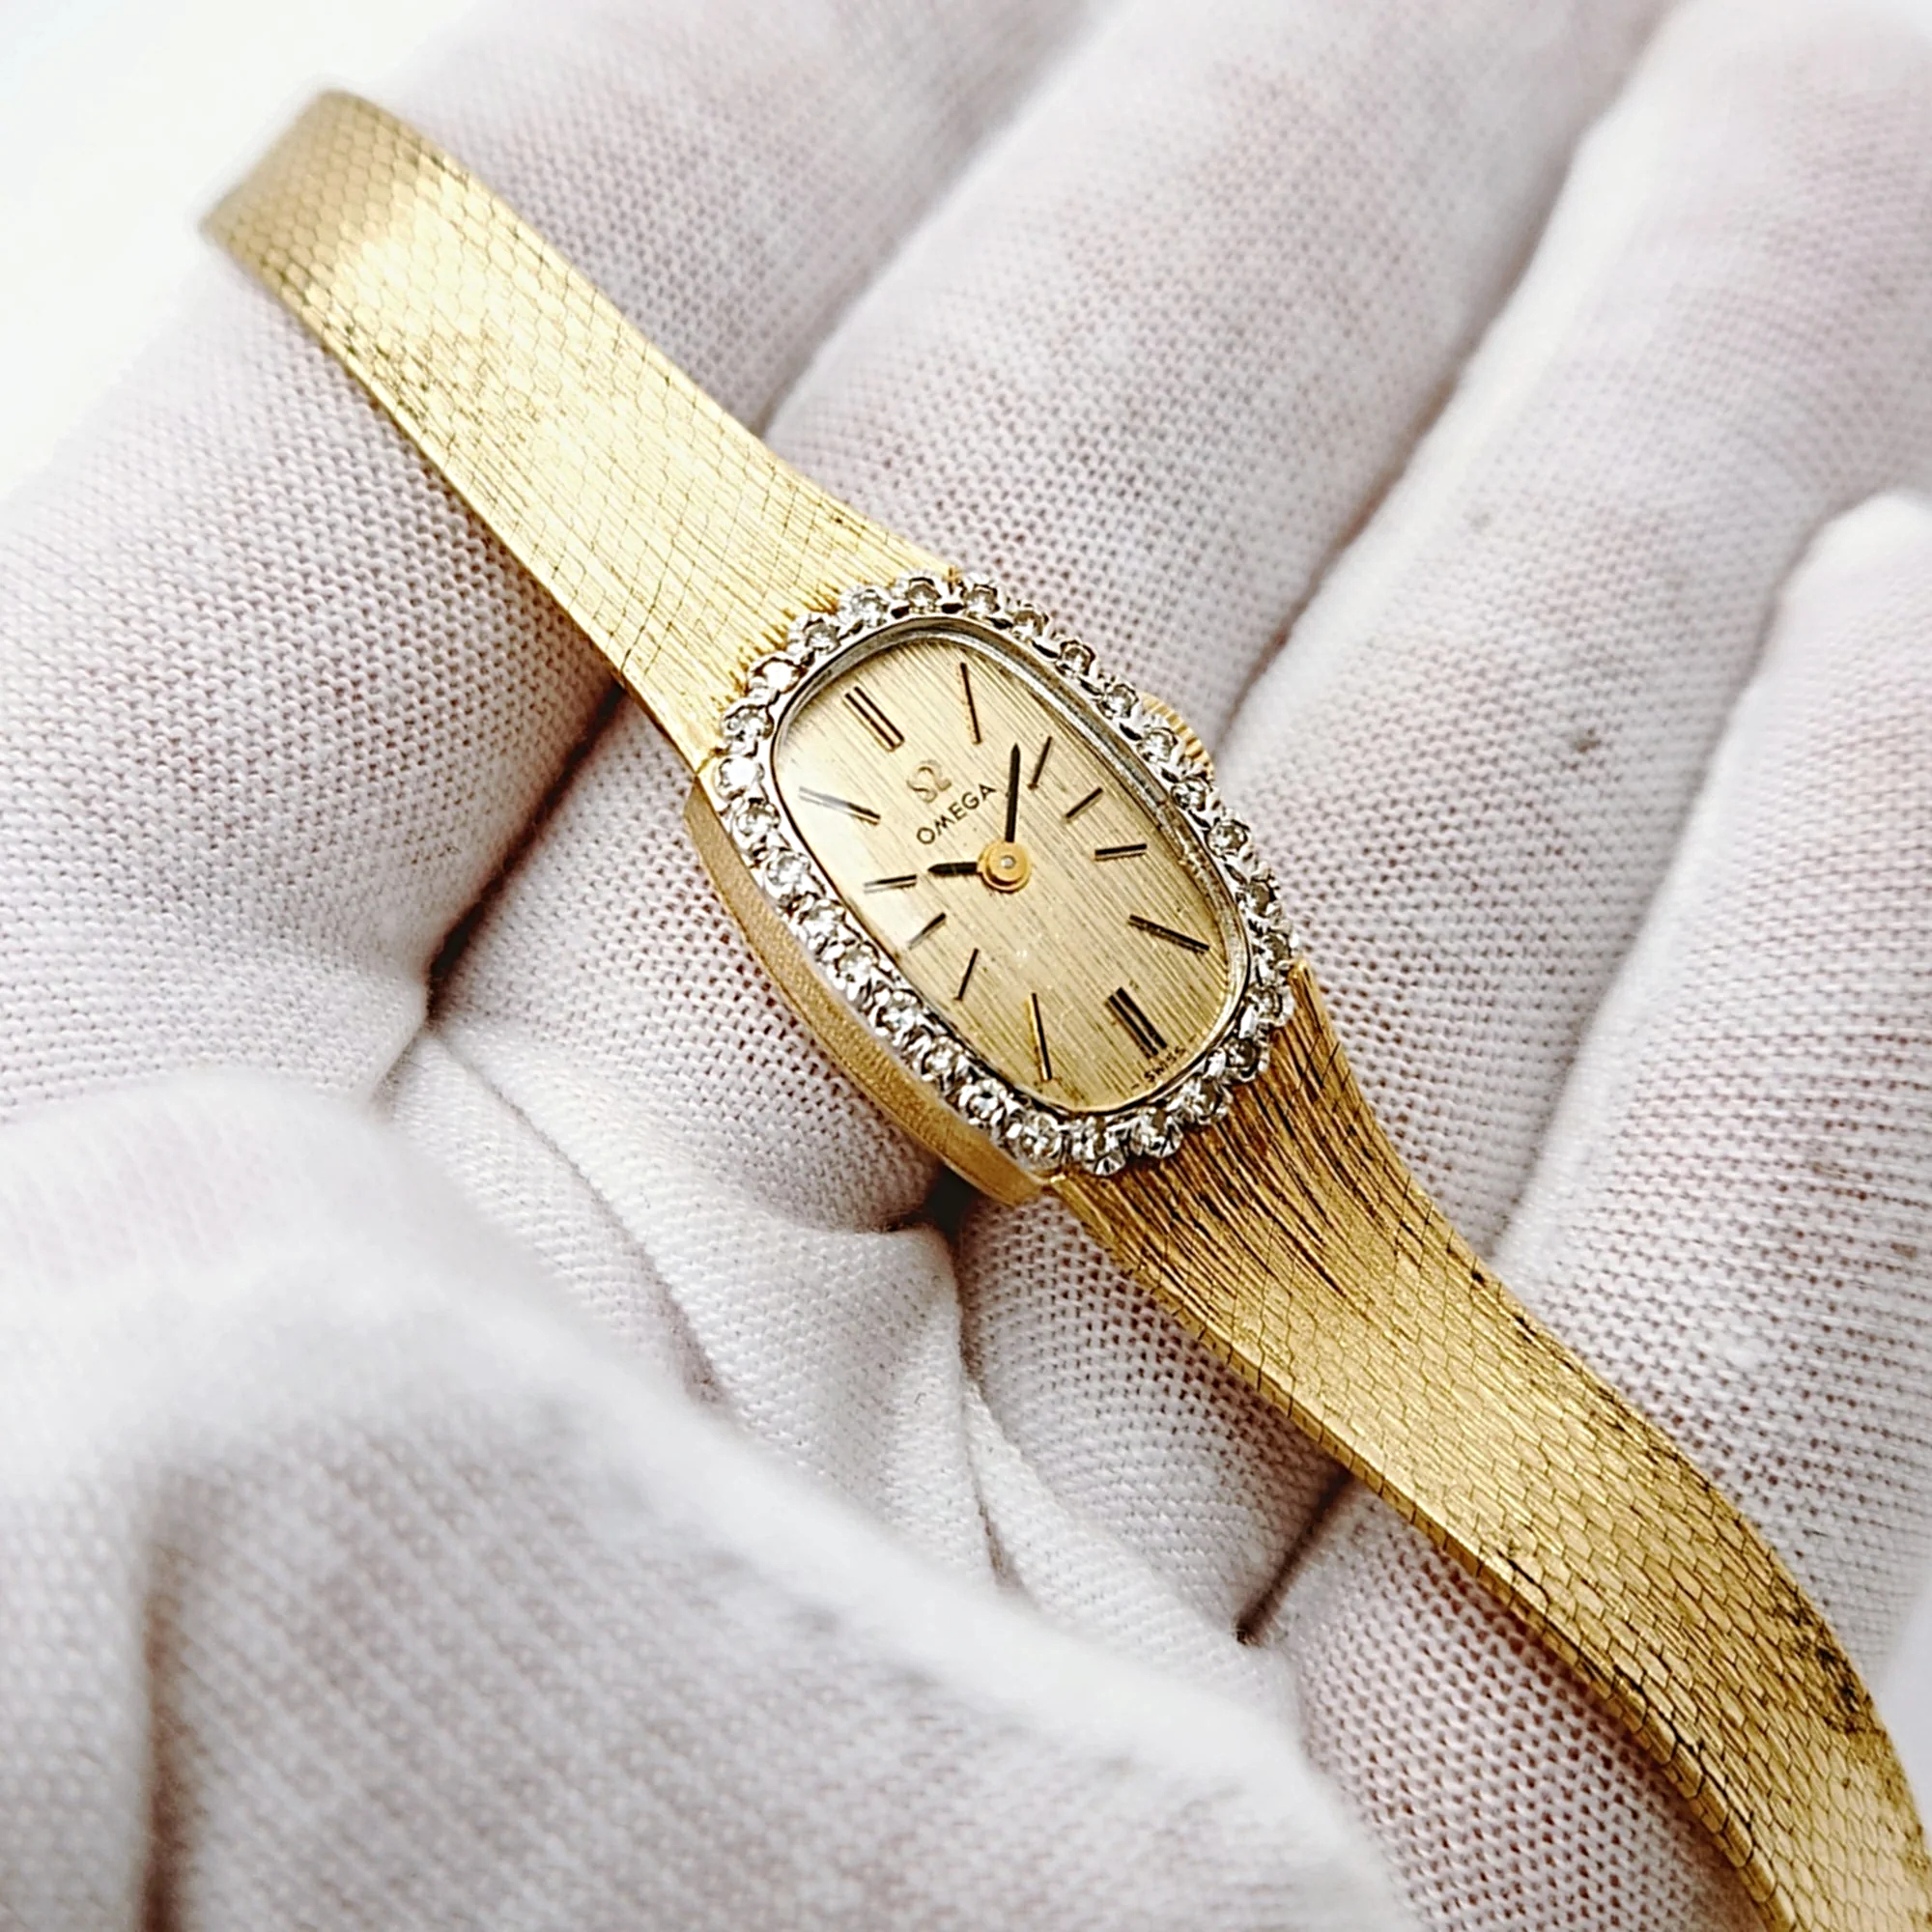 Ladies Omega 20mm Petite Vintage 14K Yellow Gold Automatic Watch with Gold Dial and Diamond Bezel. (Pre-Owned)